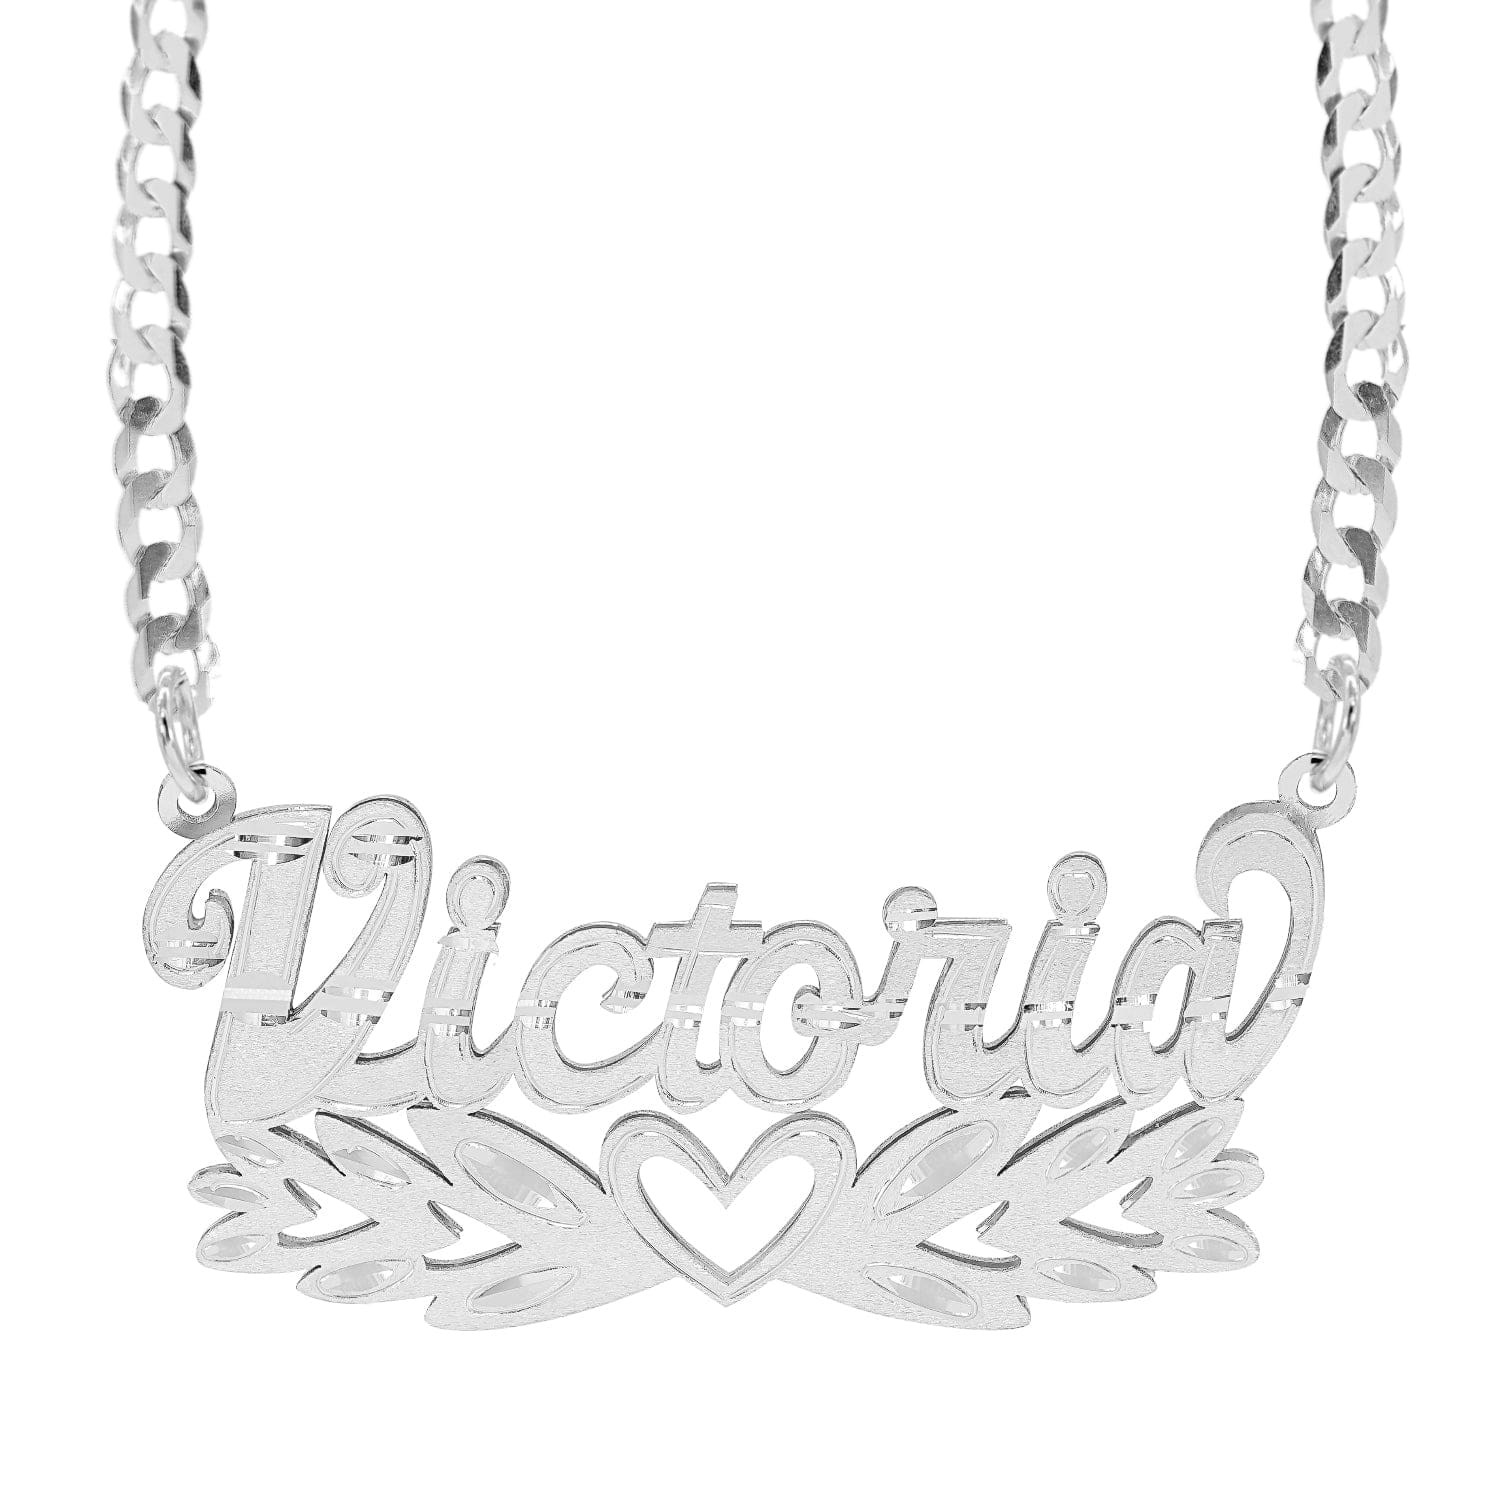 14K Gold over Sterling Silver / Cuban Chain Personalized Double Nameplate Necklace "Victoria" with Cuban chain